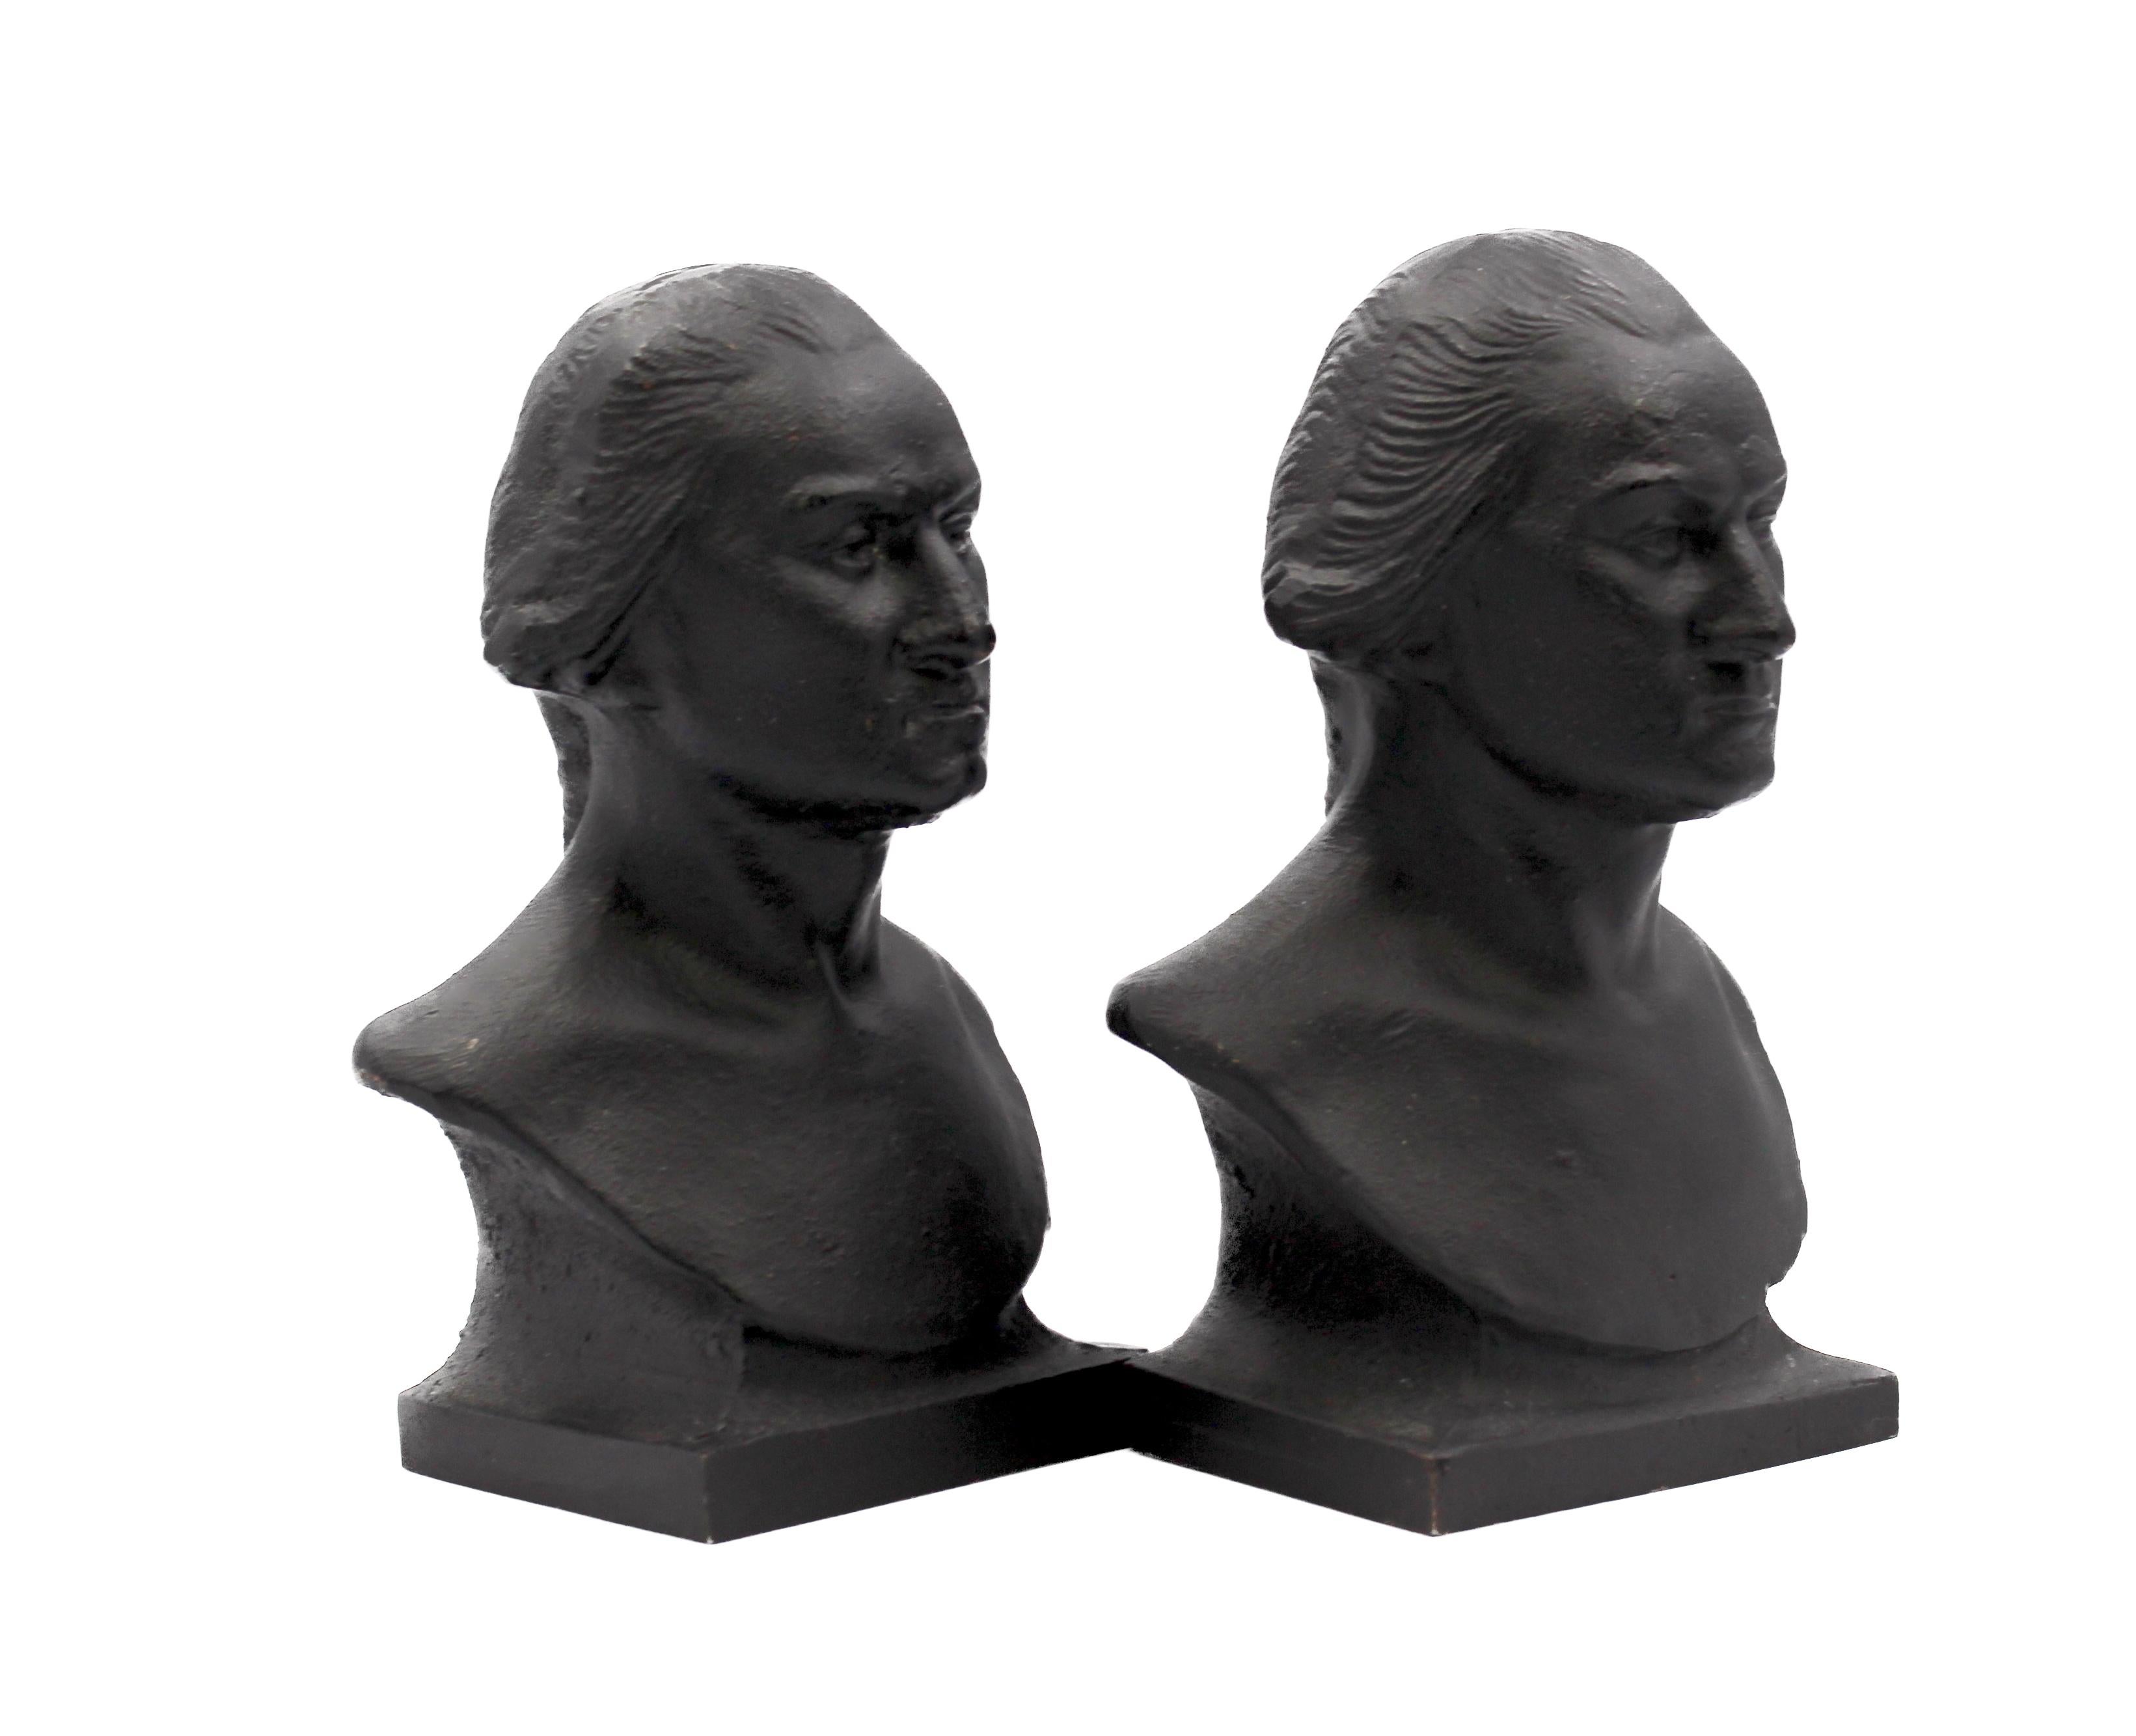 Presented is a set of vintage cast iron bookends, featuring the bust of George Washington. The head to shoulder likenesses celebrate the impressive legacy of our first President. 

The bookend set is modeled after the famous 1785 Jean-Antoine Houdon